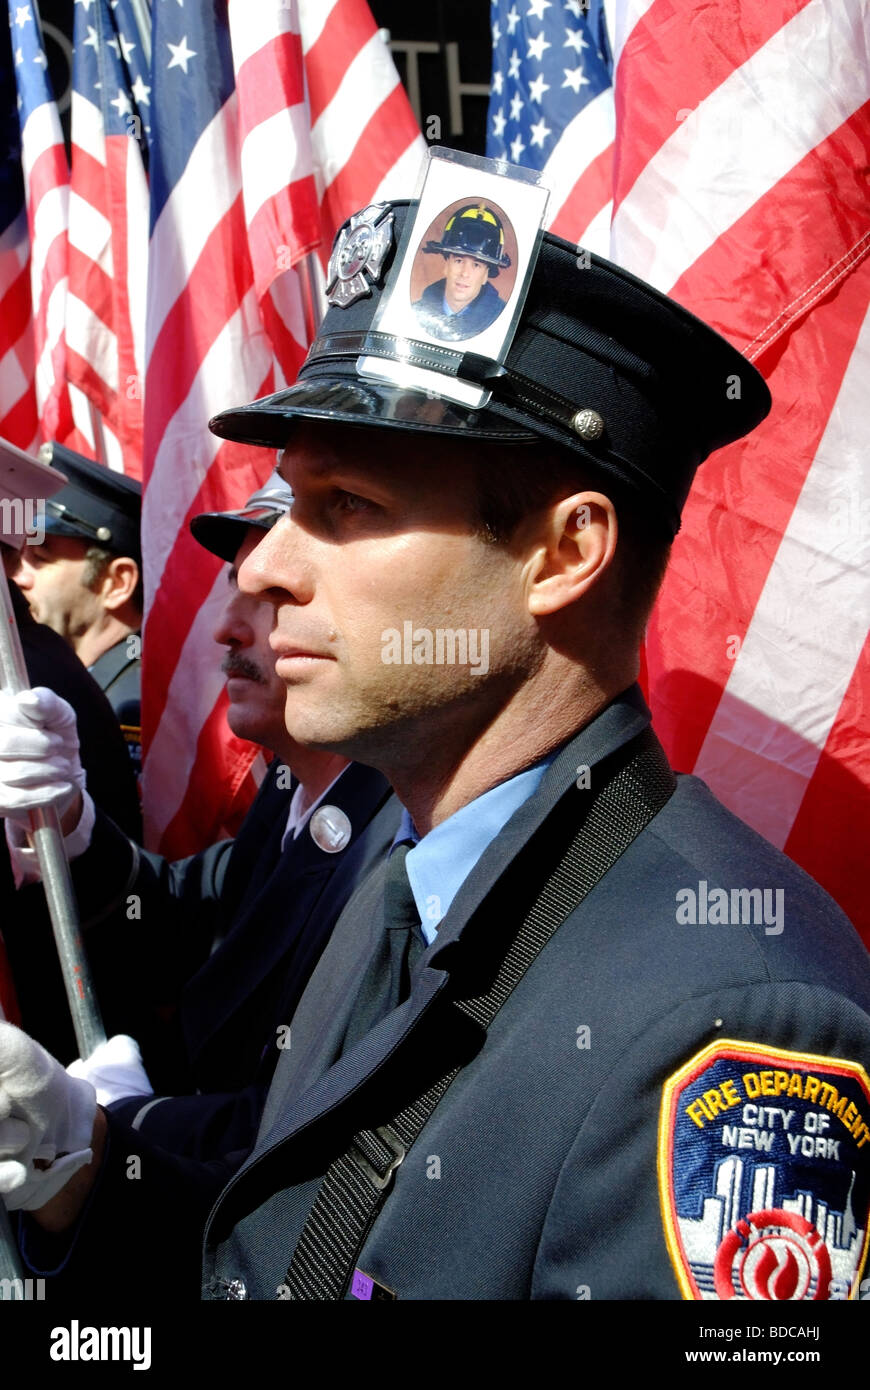 FDNY Firefighter LUKE ALLEN with photo on hat of brother, RICHARD D. ALLEN, a firefighter killed in line of duty 9/11 2001, St. Patrick's Day Parade Stock Photo